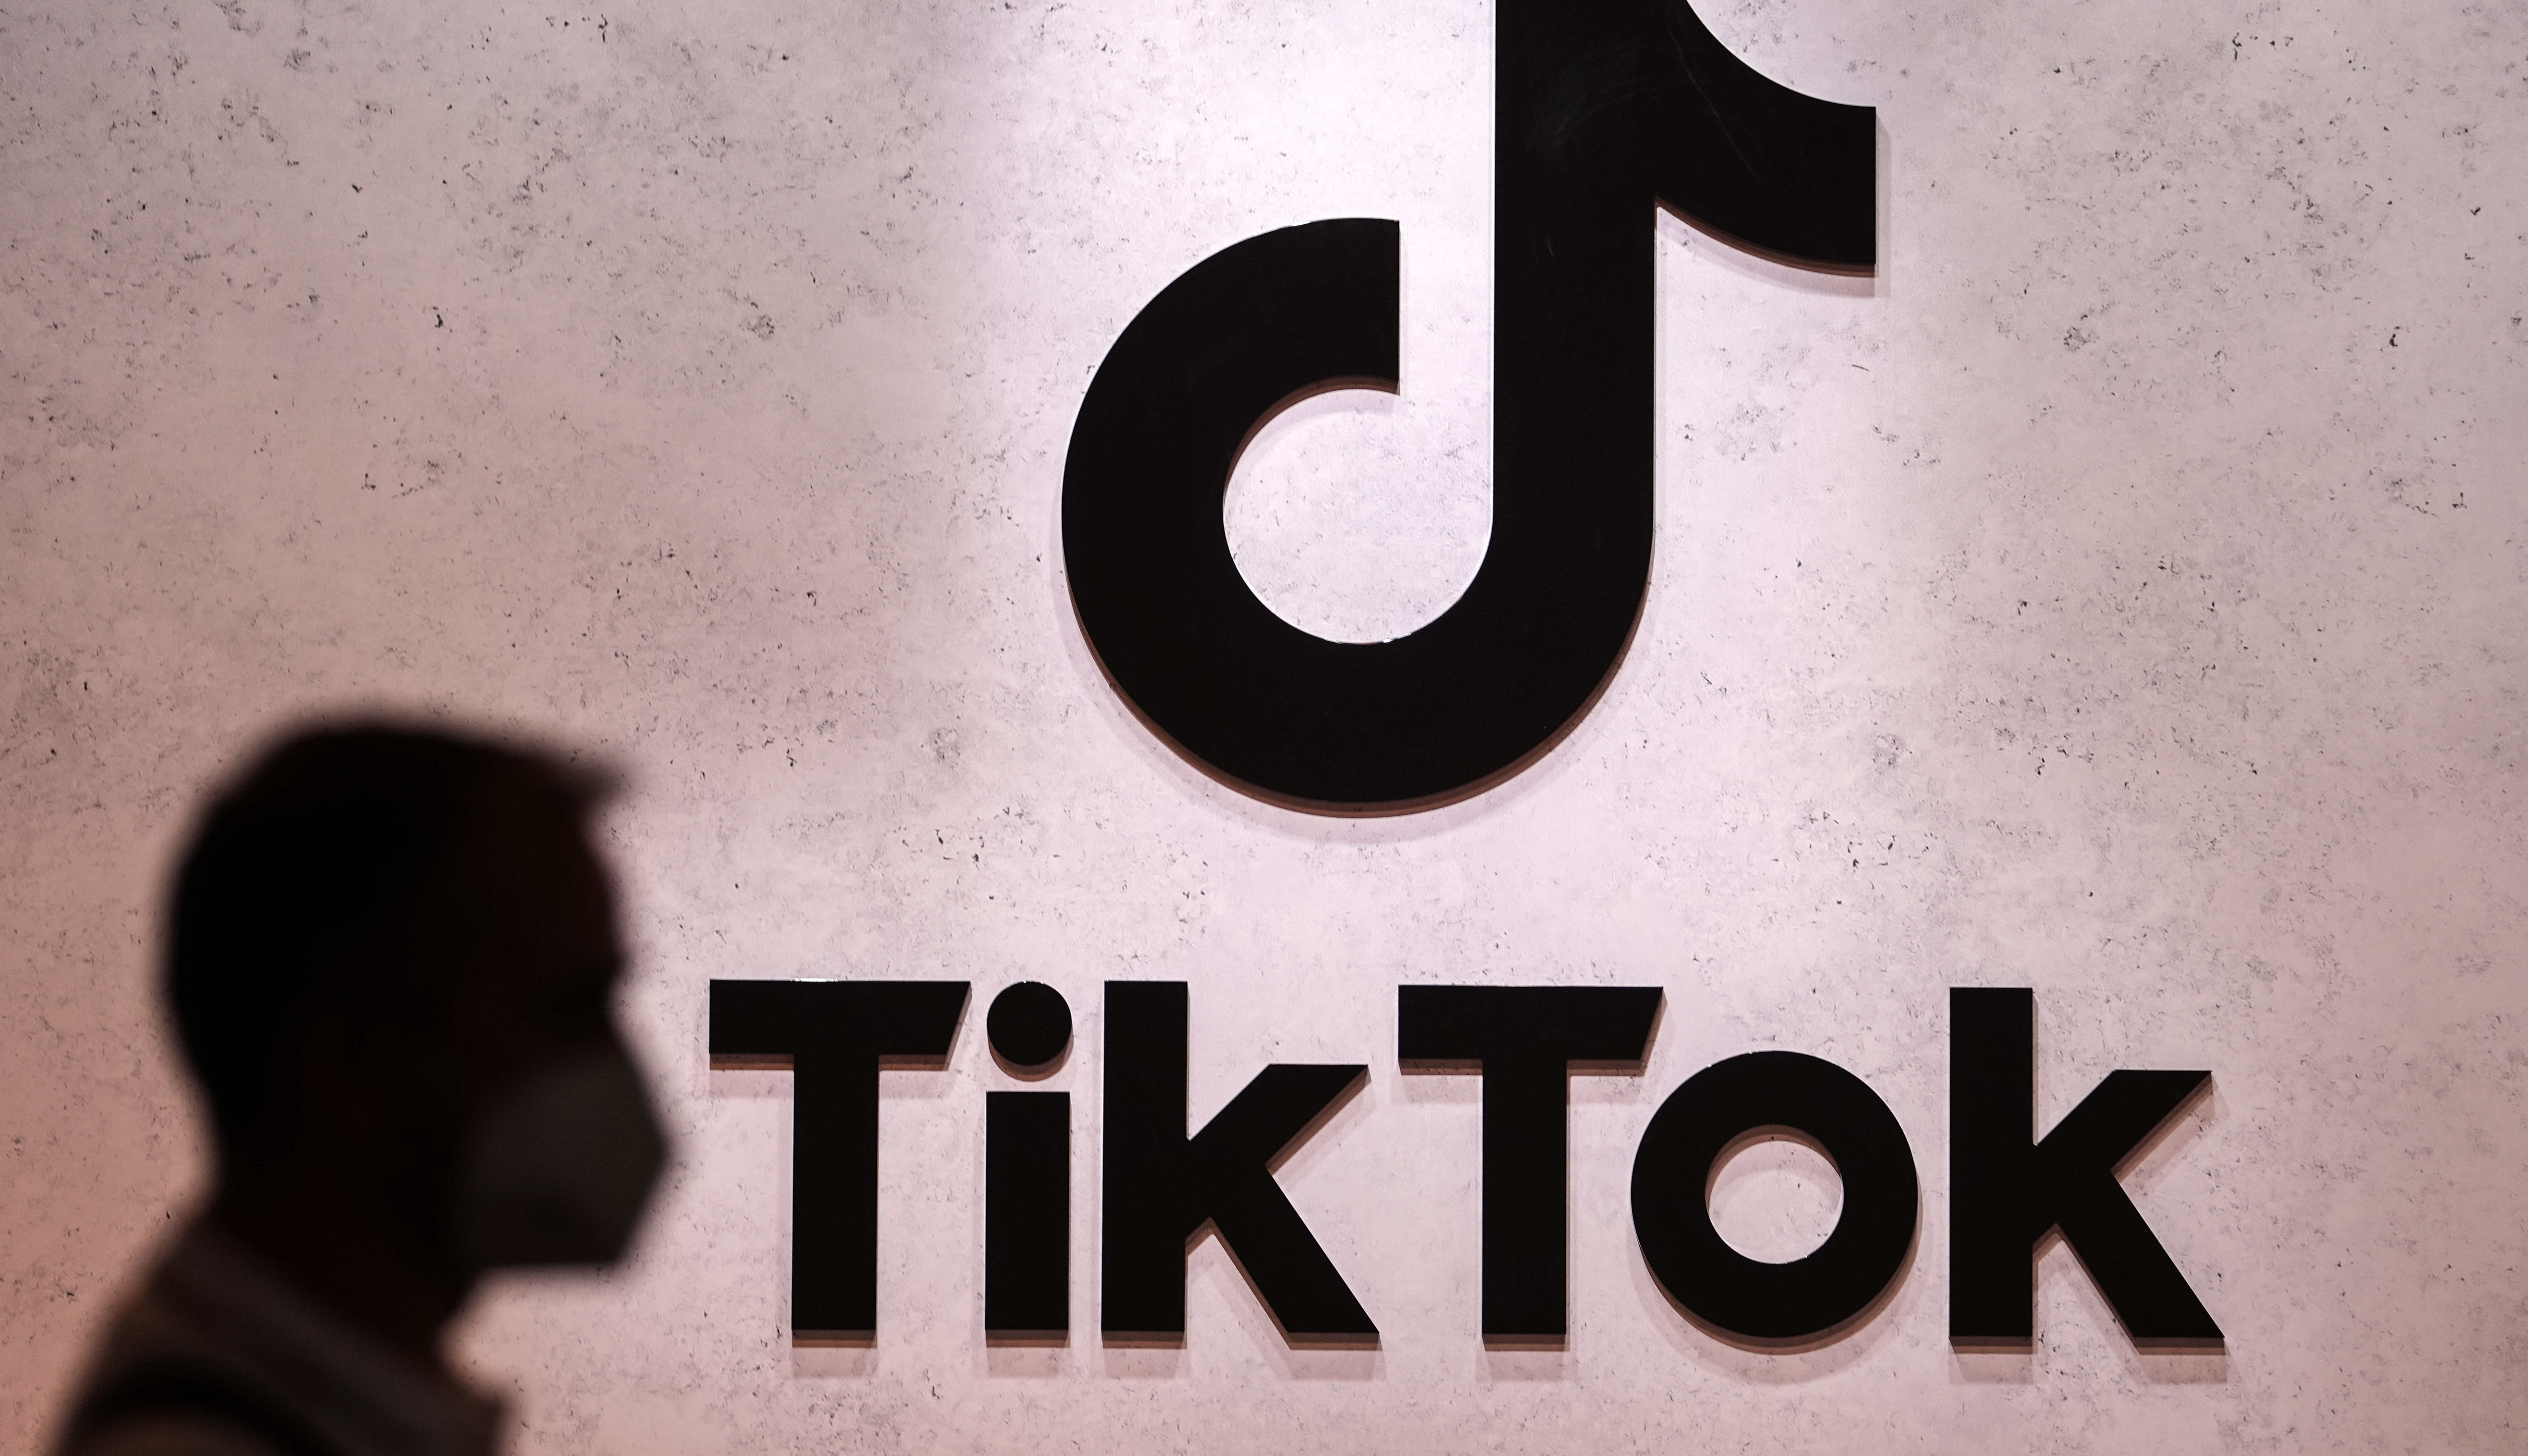 TikTok’s battle for survival has become a vivid study in how a wealthy, foreign-owned corporation can use its financial might to build an impressive-looking network of influence.